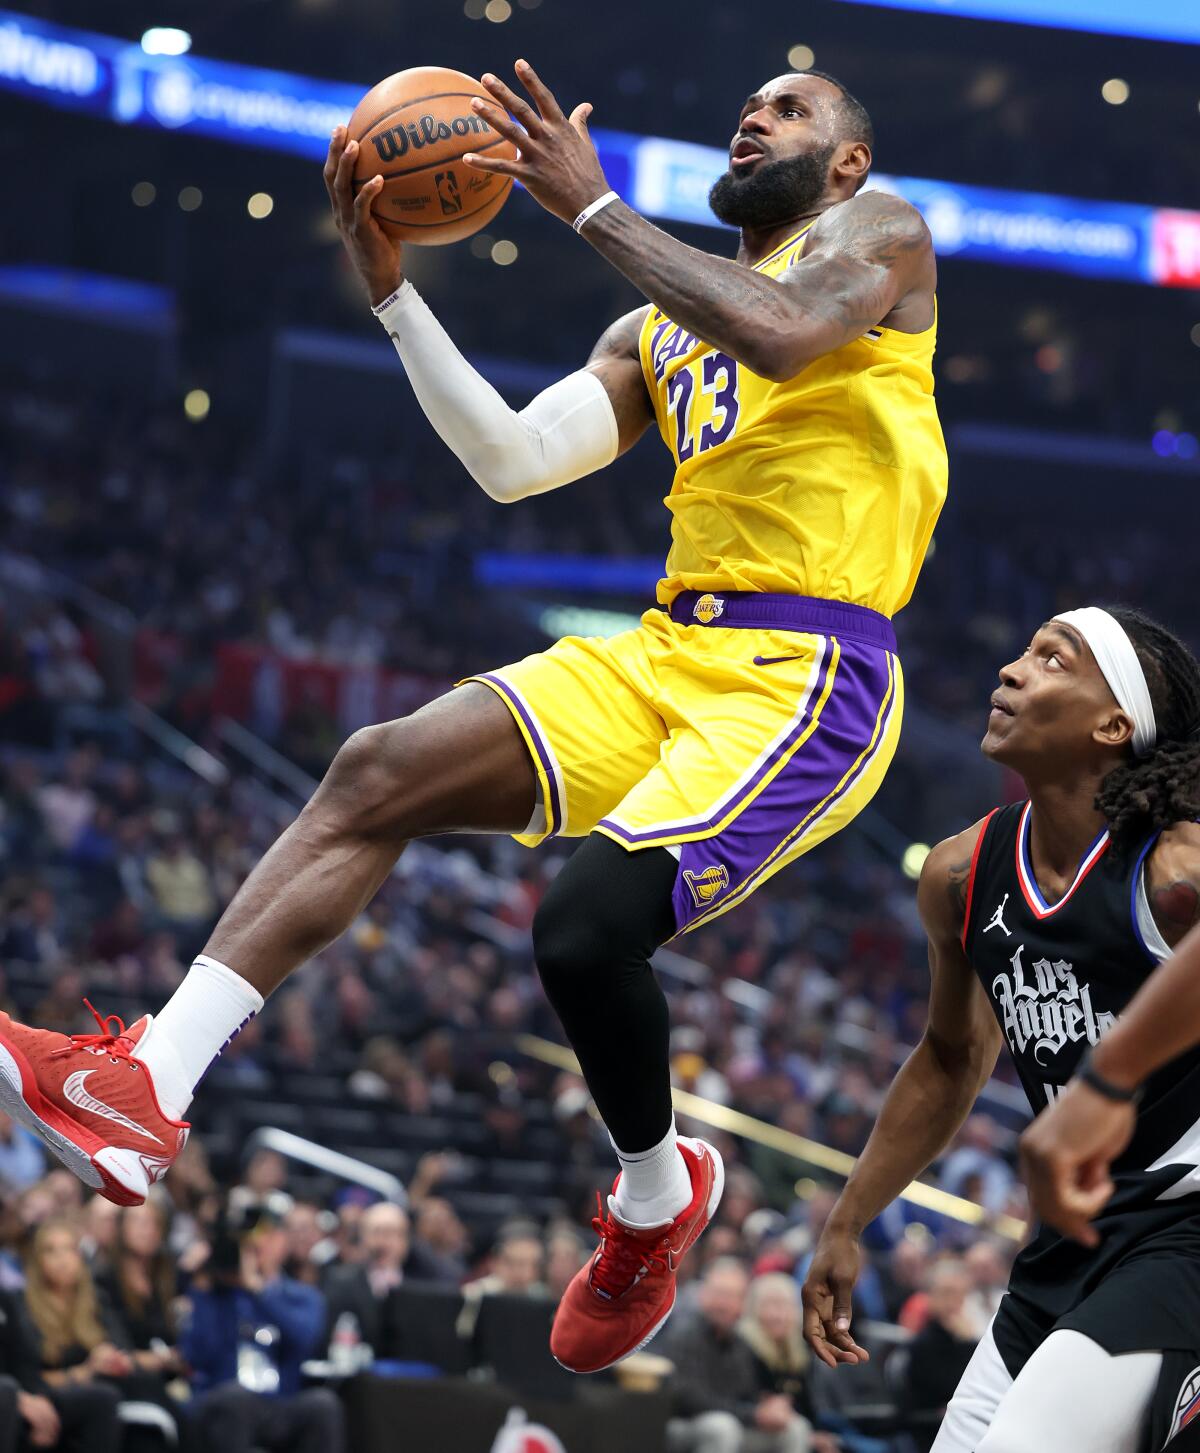 The Lakers' LeBron James drives past the Clippers' Terance Mann in the second quarter at Crypto.com Arena.